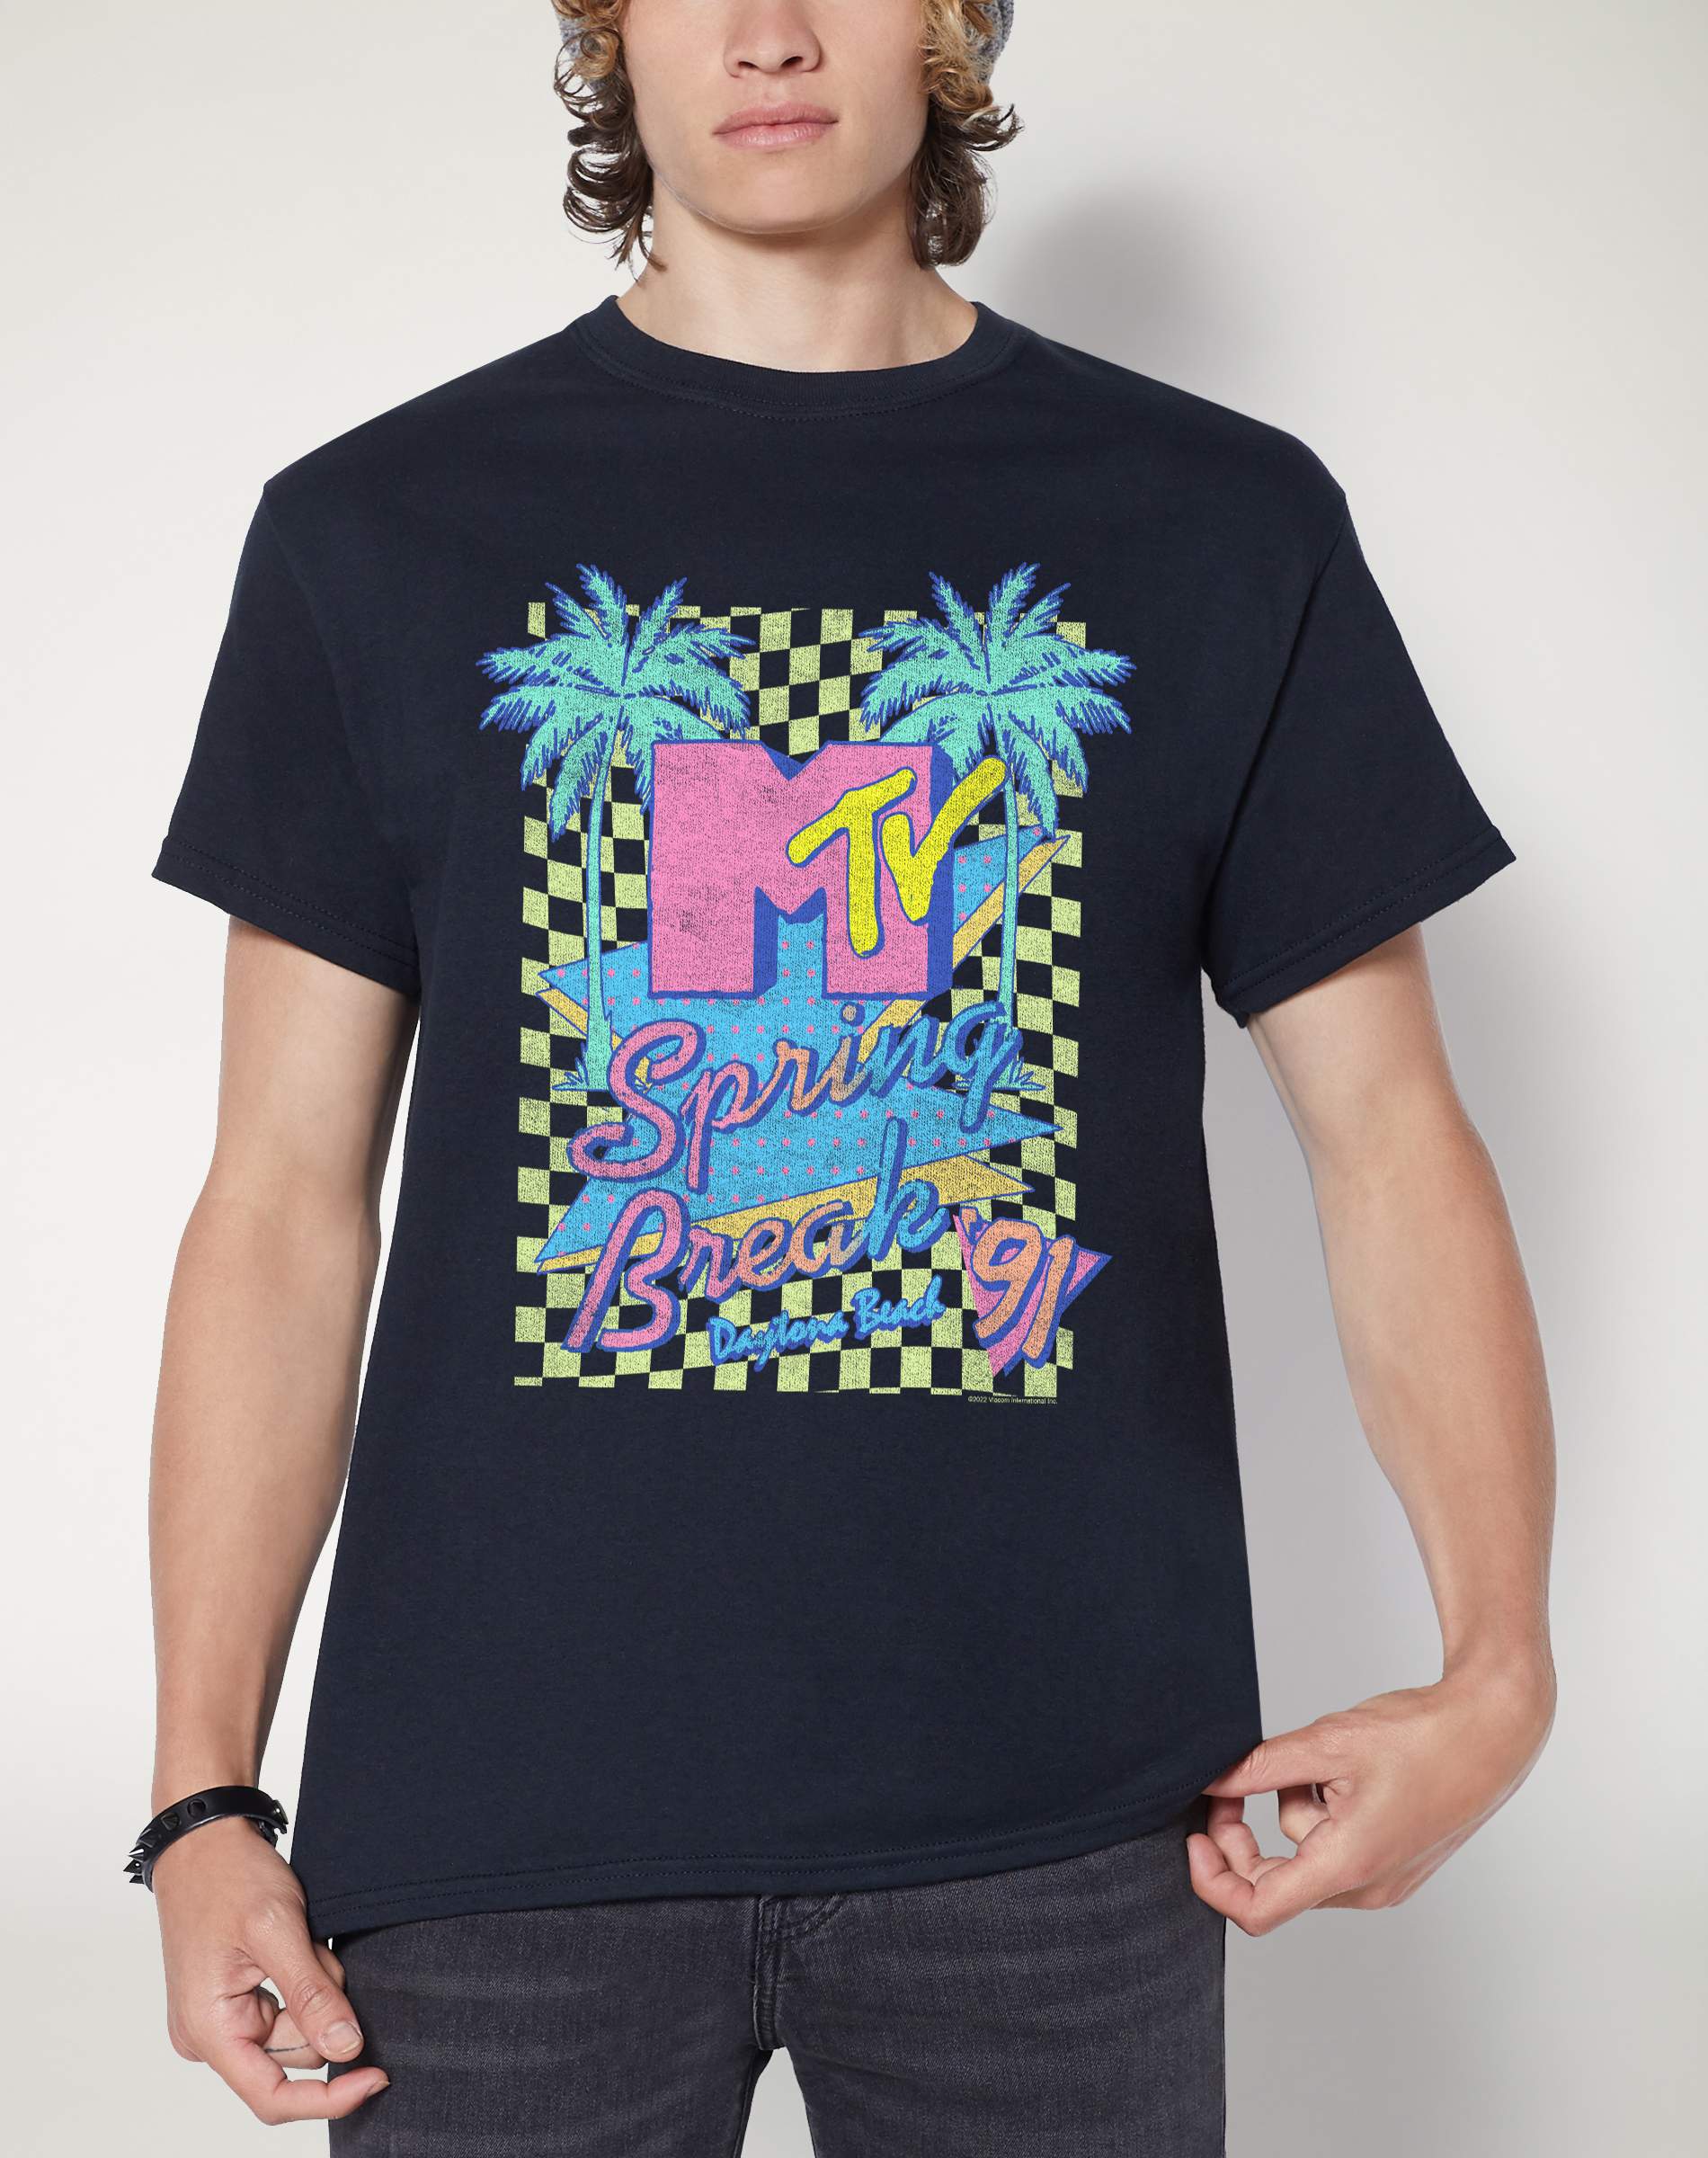 Graphic Tees | Graphic T-Shirts - Spencer's